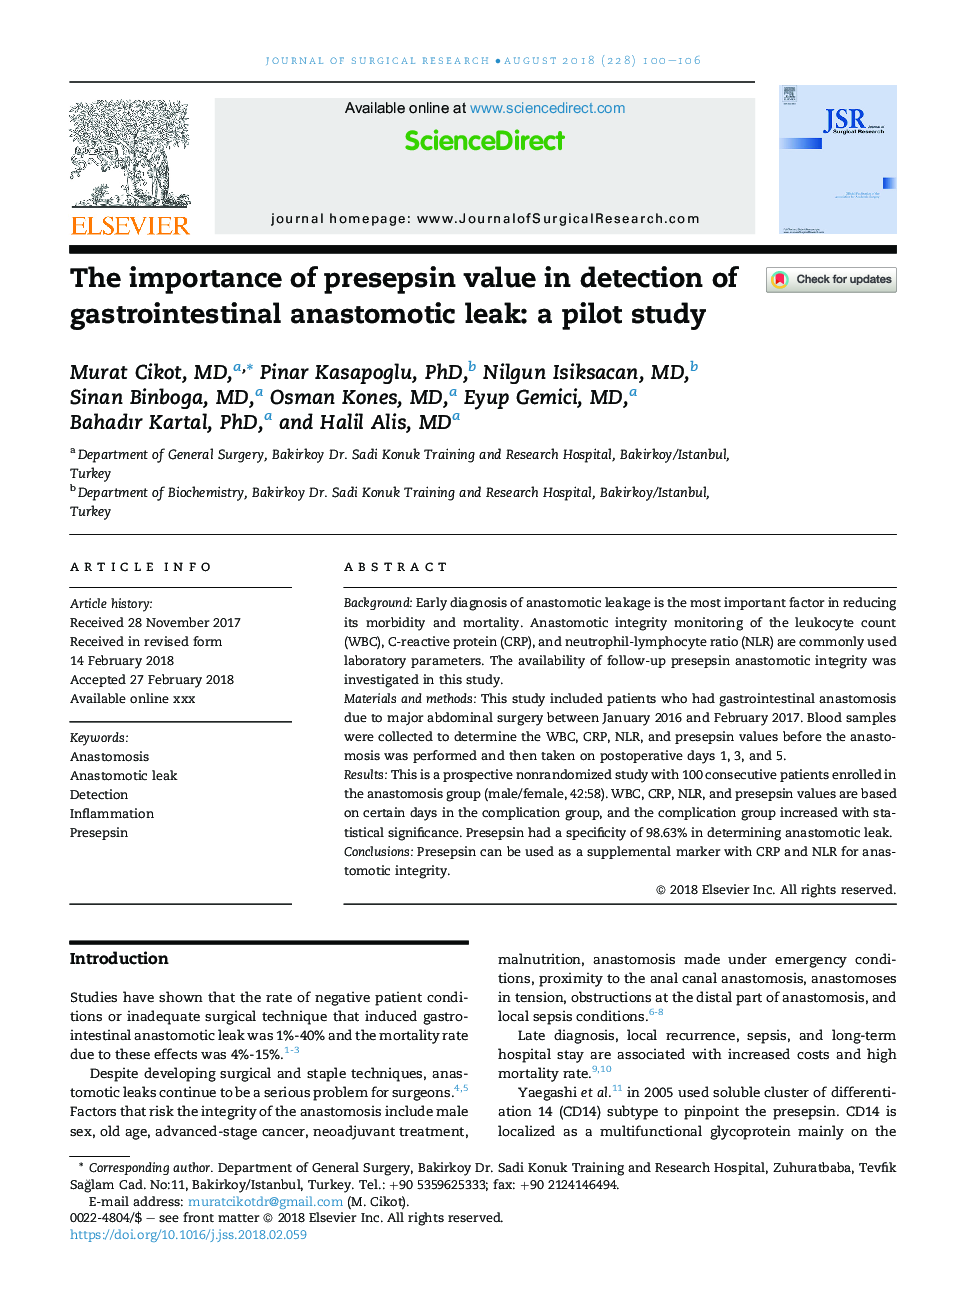 The importance of presepsin value in detection of gastrointestinal anastomotic leak: a pilot study